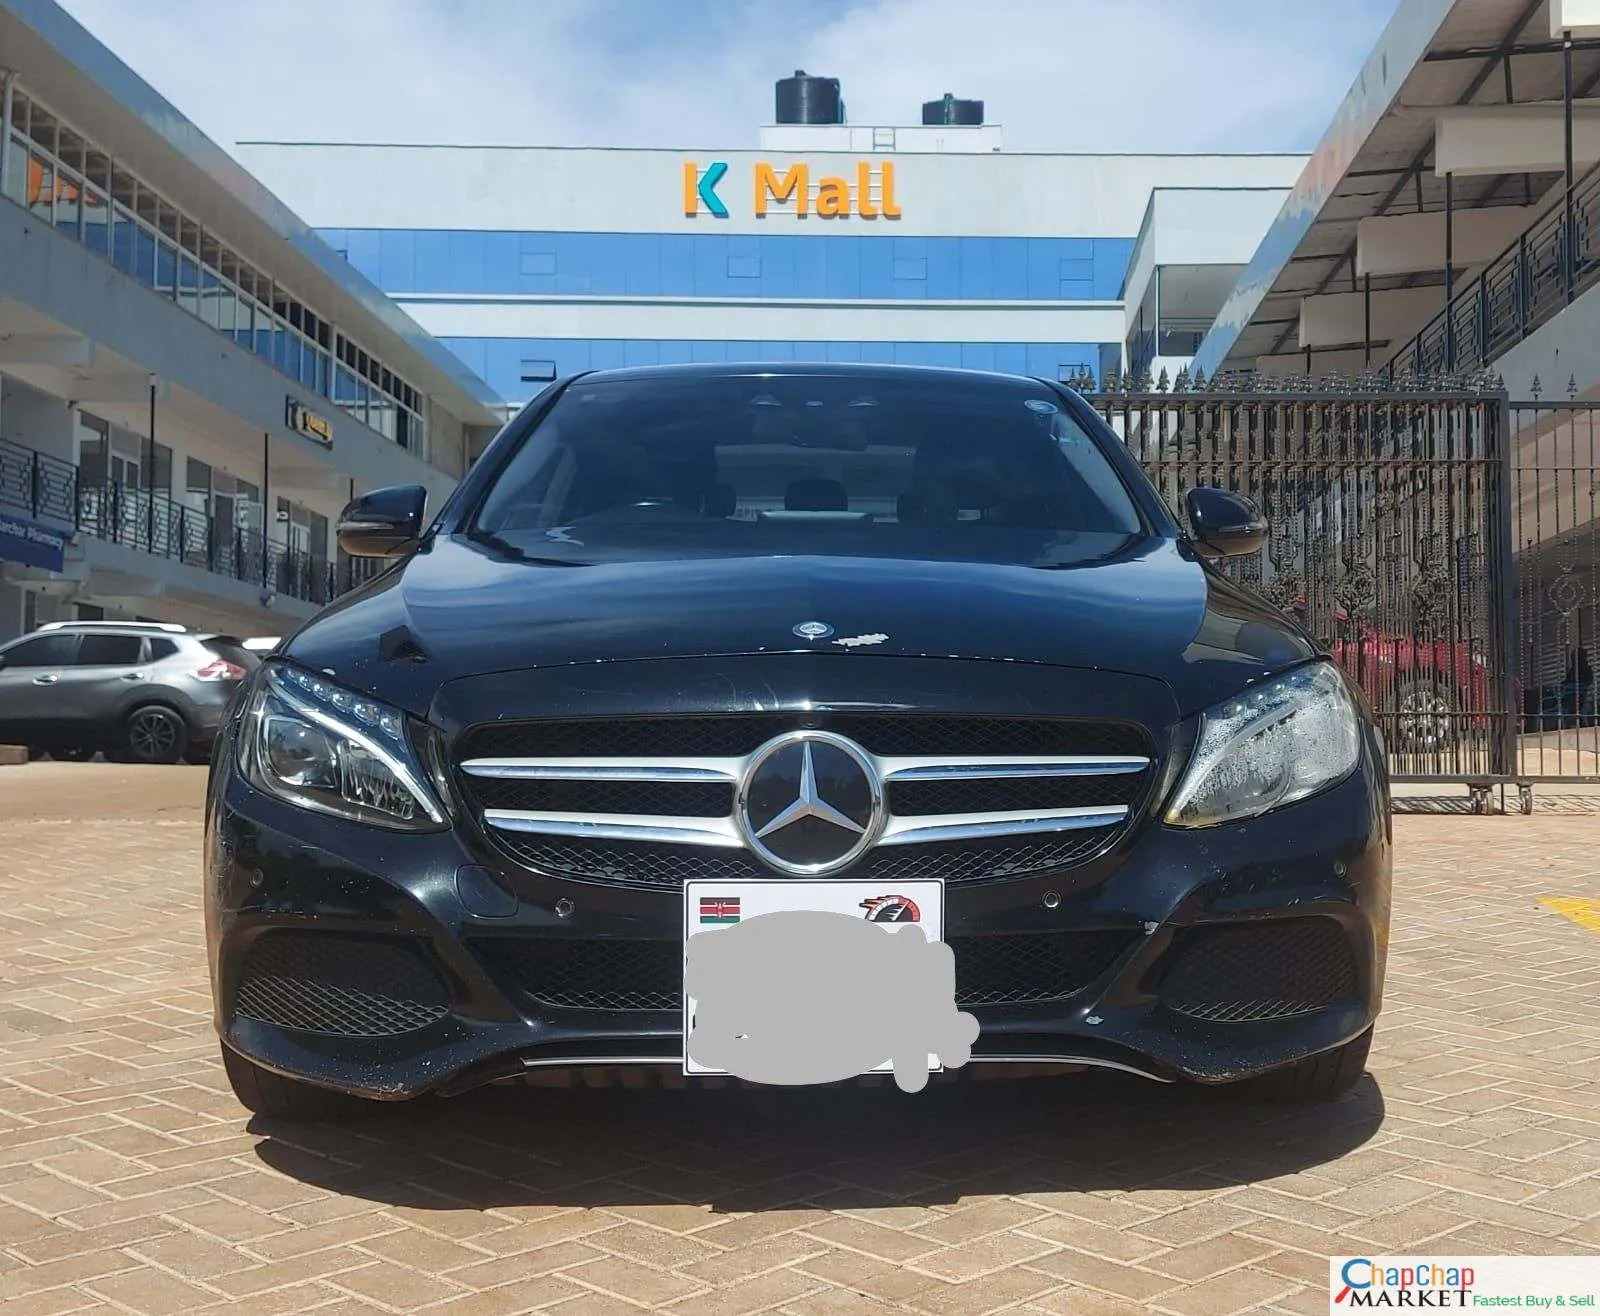 Mercedes Benz C180 Just Arrived 🔥 🔥 🔥 You Pay 30% DEPOSIT Trade in OK EXCLUSIVE hire purchase installments